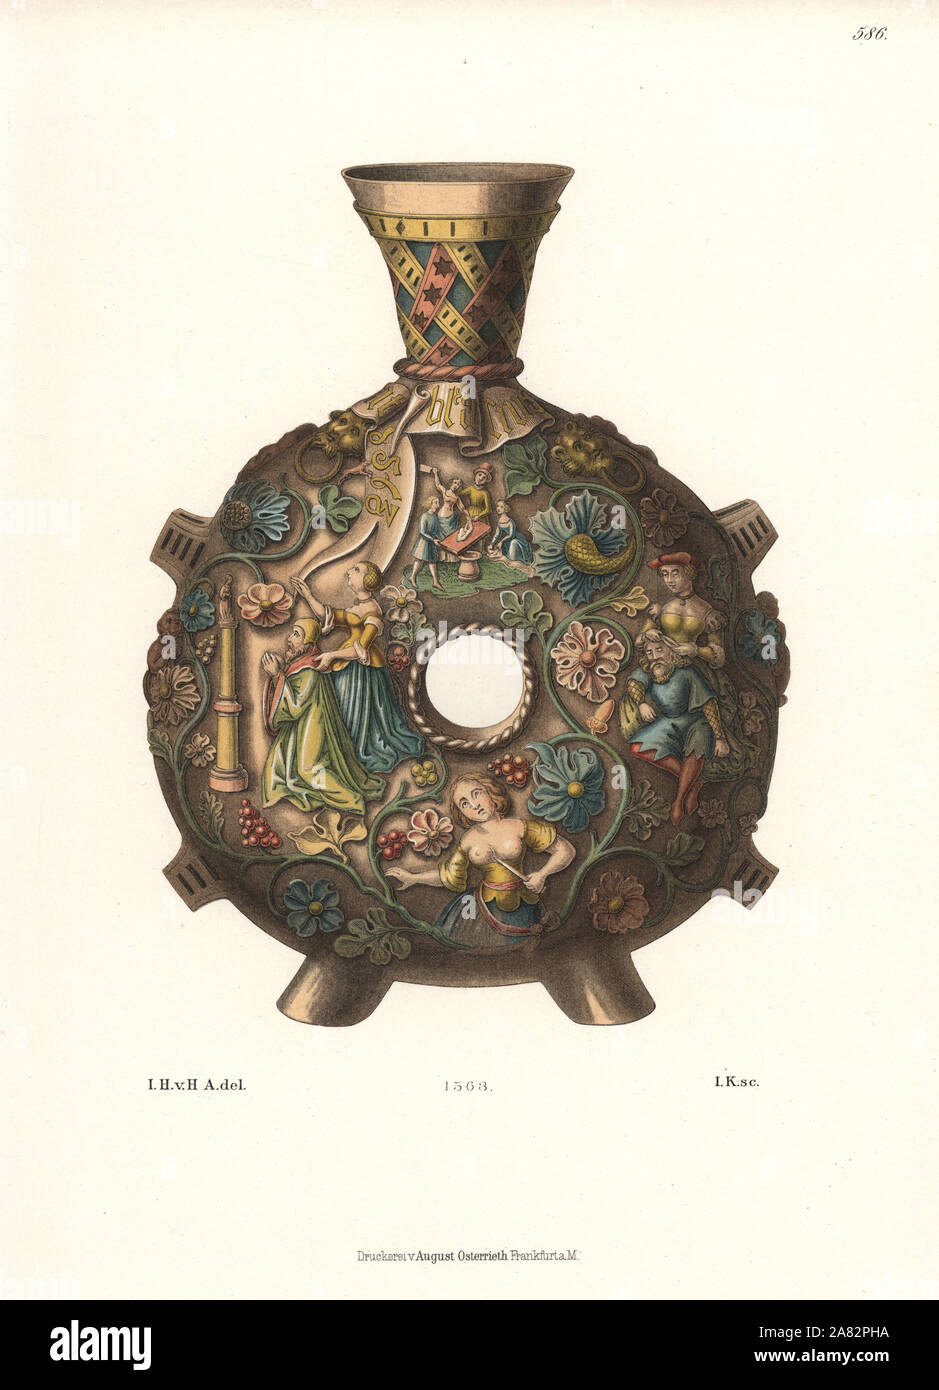 German wine jug decorated with images of Samson and Delilah, Solomon and daughters, and Dido or Lucretia with dagger. Chromolithograph from Hefner-Alteneck's Costumes, Artworks and Appliances from the Middle Ages to the 17th Century, Frankfurt, 1889. Illustration by Dr. Jakob Heinrich von Hefner-Alteneck, lithographed by Heinrich Keller. Dr. Hefner-Alteneck (1811-1903) was a German museum curator, archaeologist, art historian, illustrator and etcher. Stock Photo